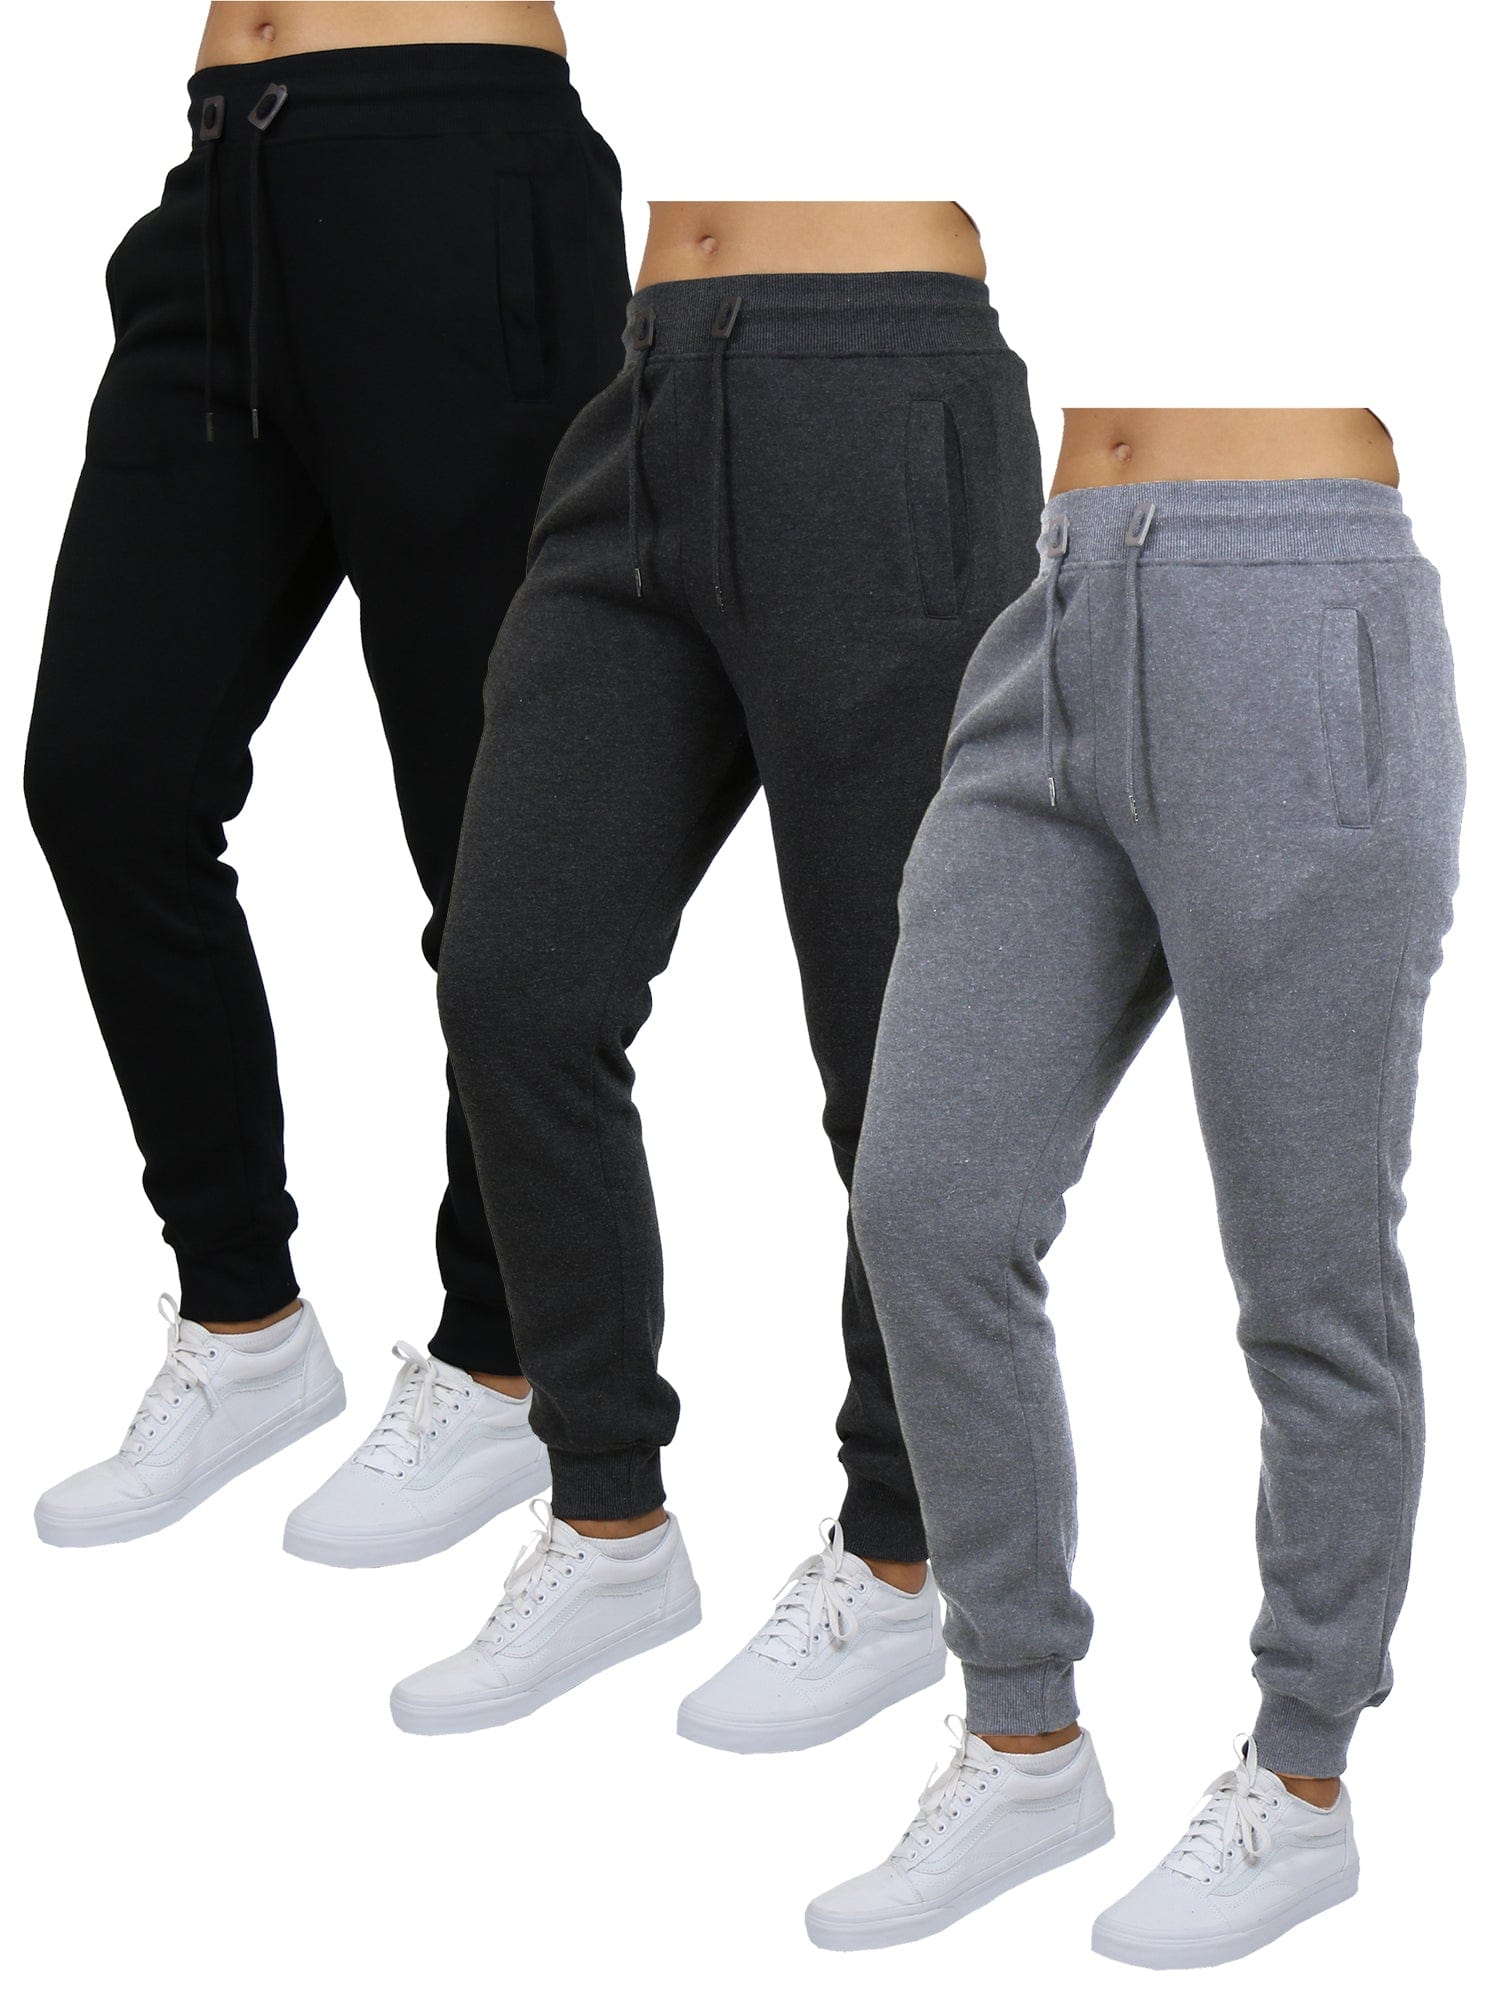 3-Pack] Women's Loose-Fit Fleece Jogger Sweatpants – GalaxybyHarvic